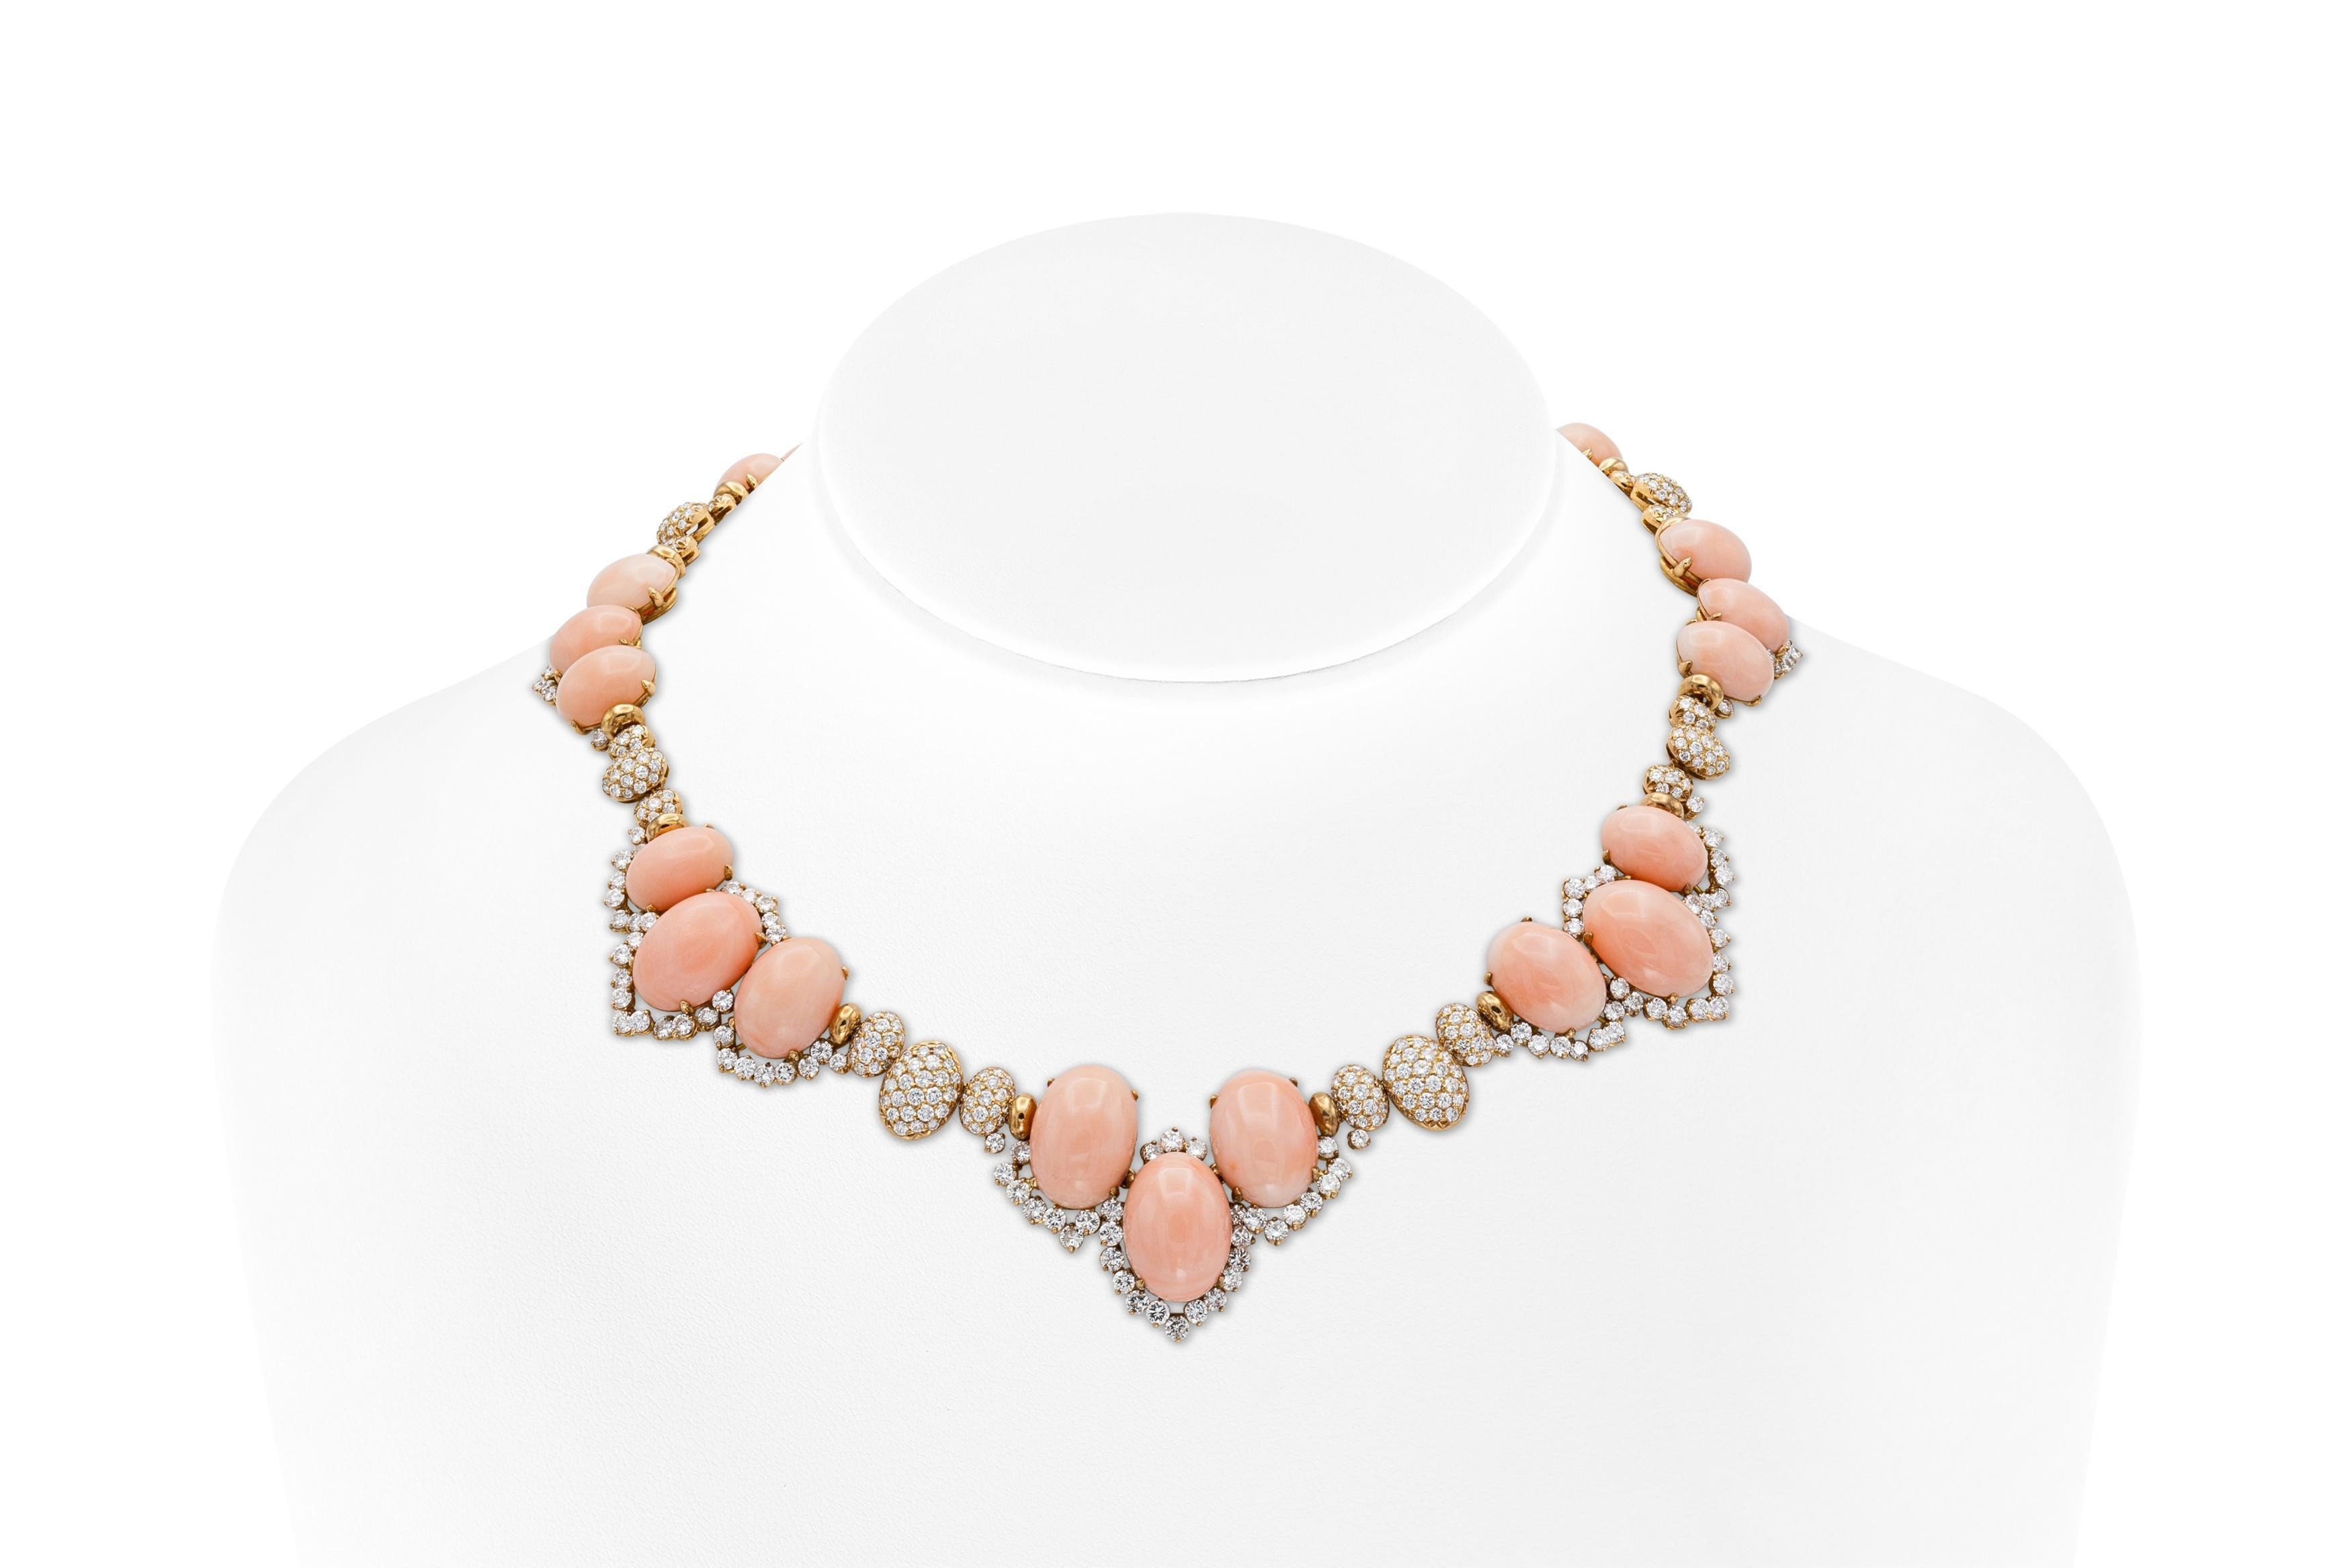 Finely crafted in 18k yellow gold with Angel Skin Corals and Round Brilliant cut Diamonds weighing approximately a total of 28.00 carats.
Circa 1960s
Necklace: 16 1/2 inches long
Bracelet: size 6 1/2 inches
Earrings: 1 inch long